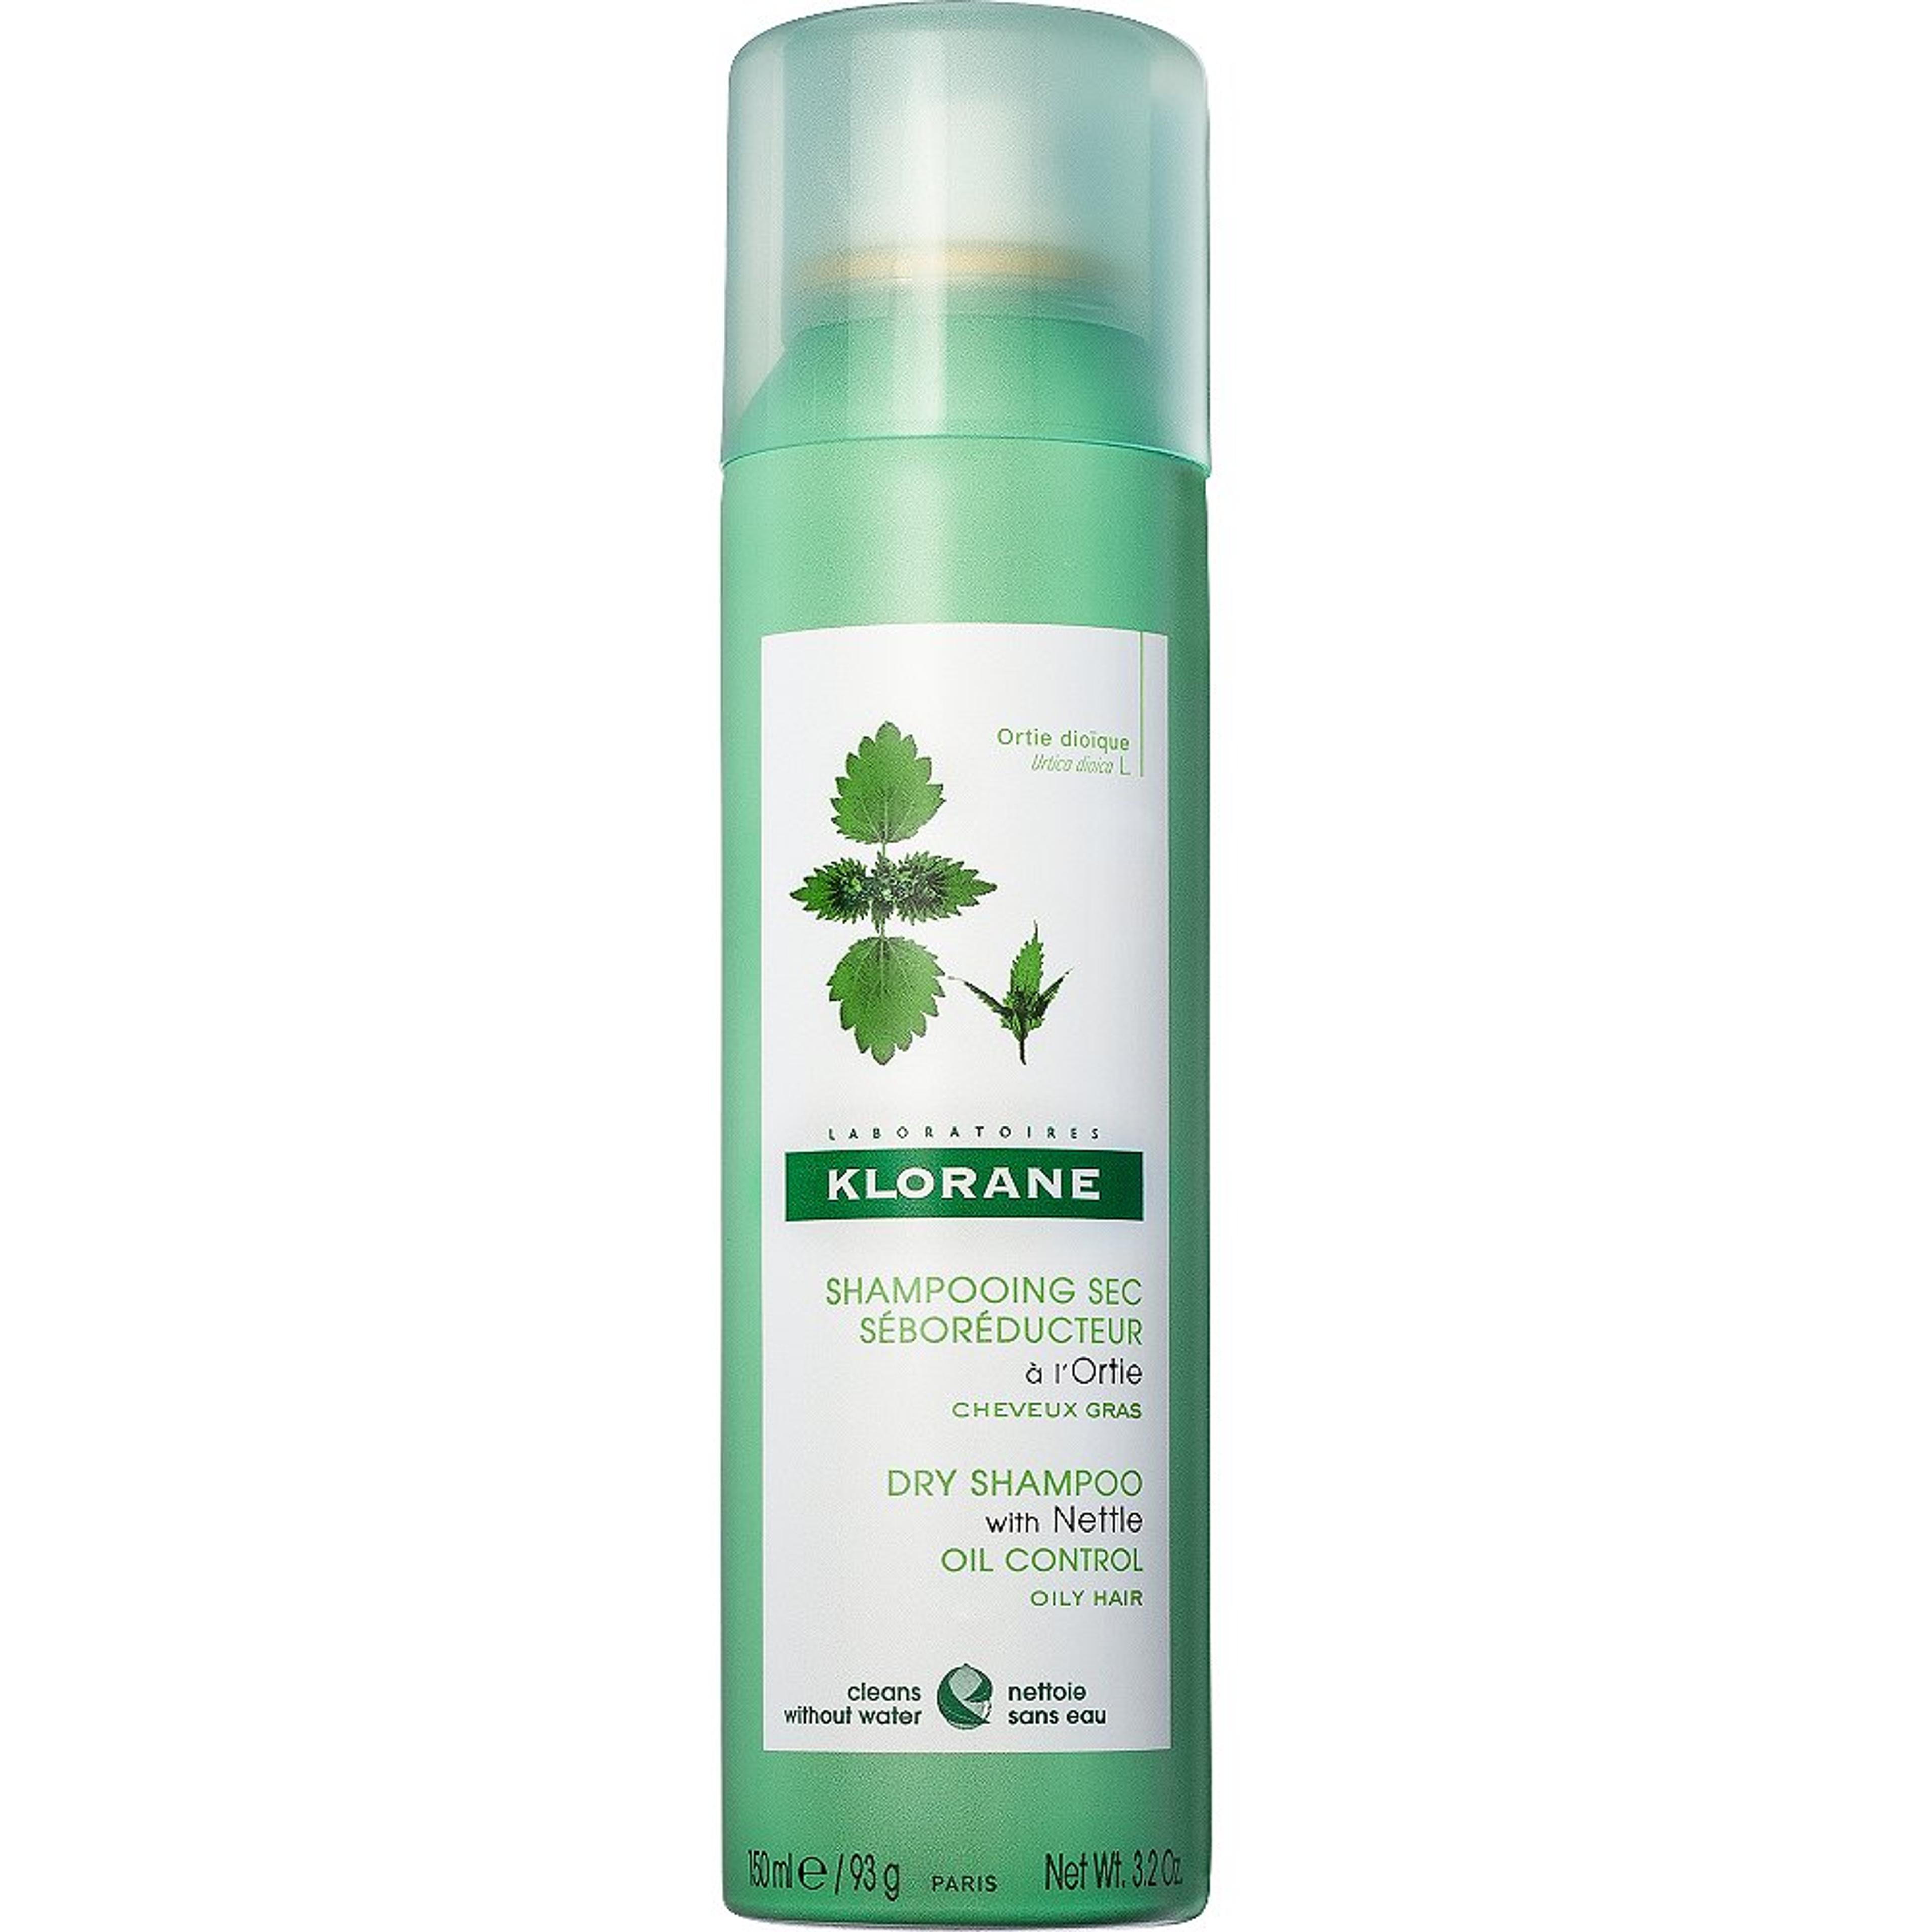 Oil-Control Dry Shampoo with Nettle